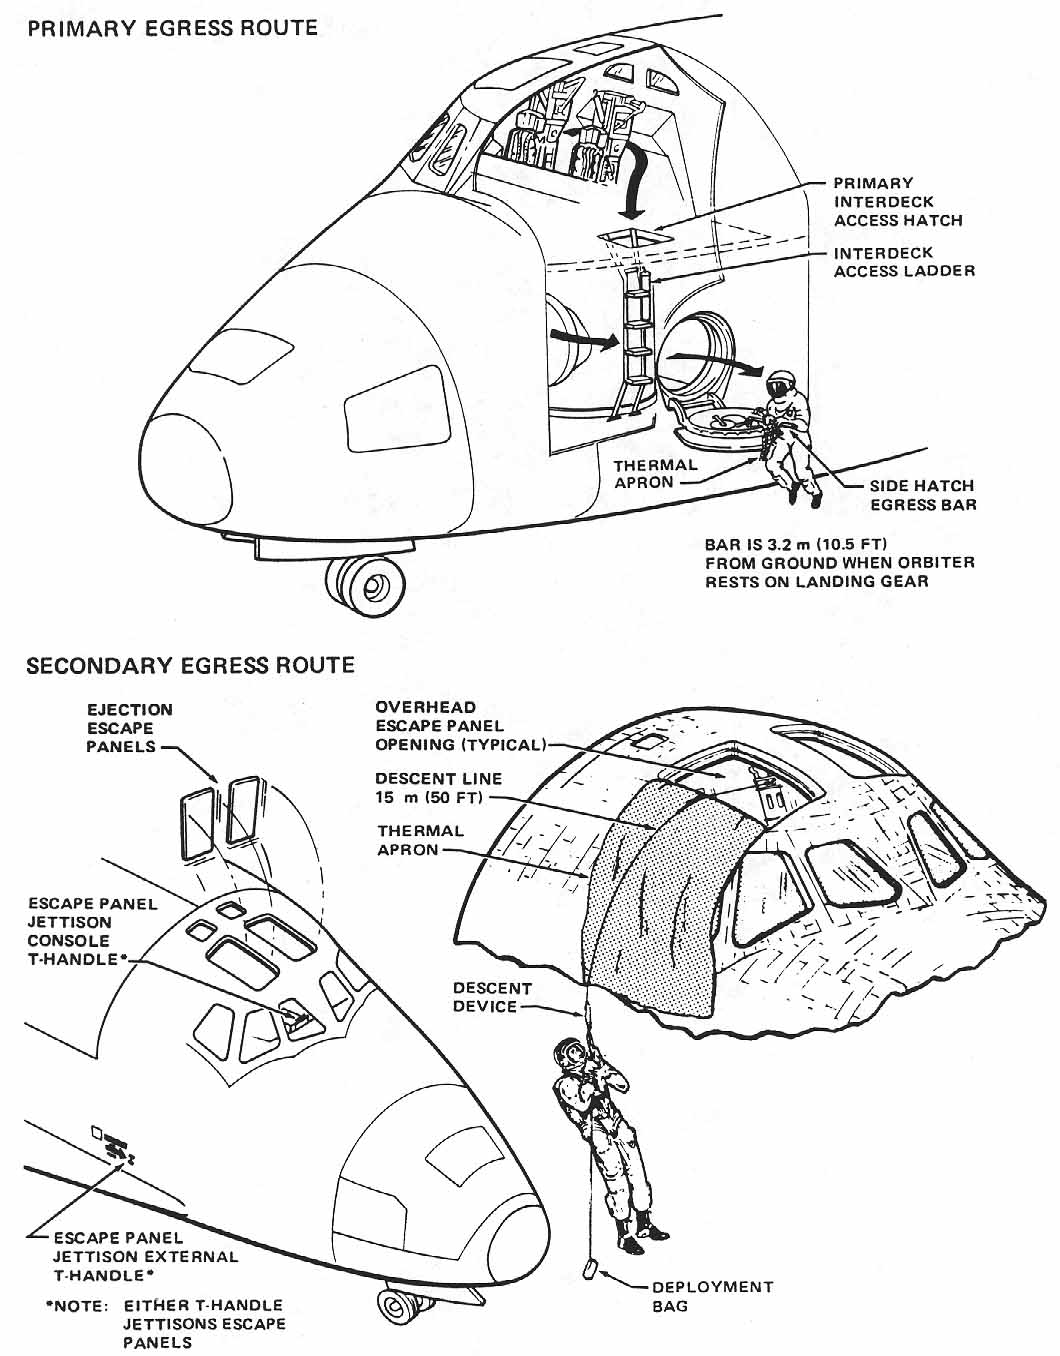 diagram illustrating the 3 different methods of exiting the spacescraft